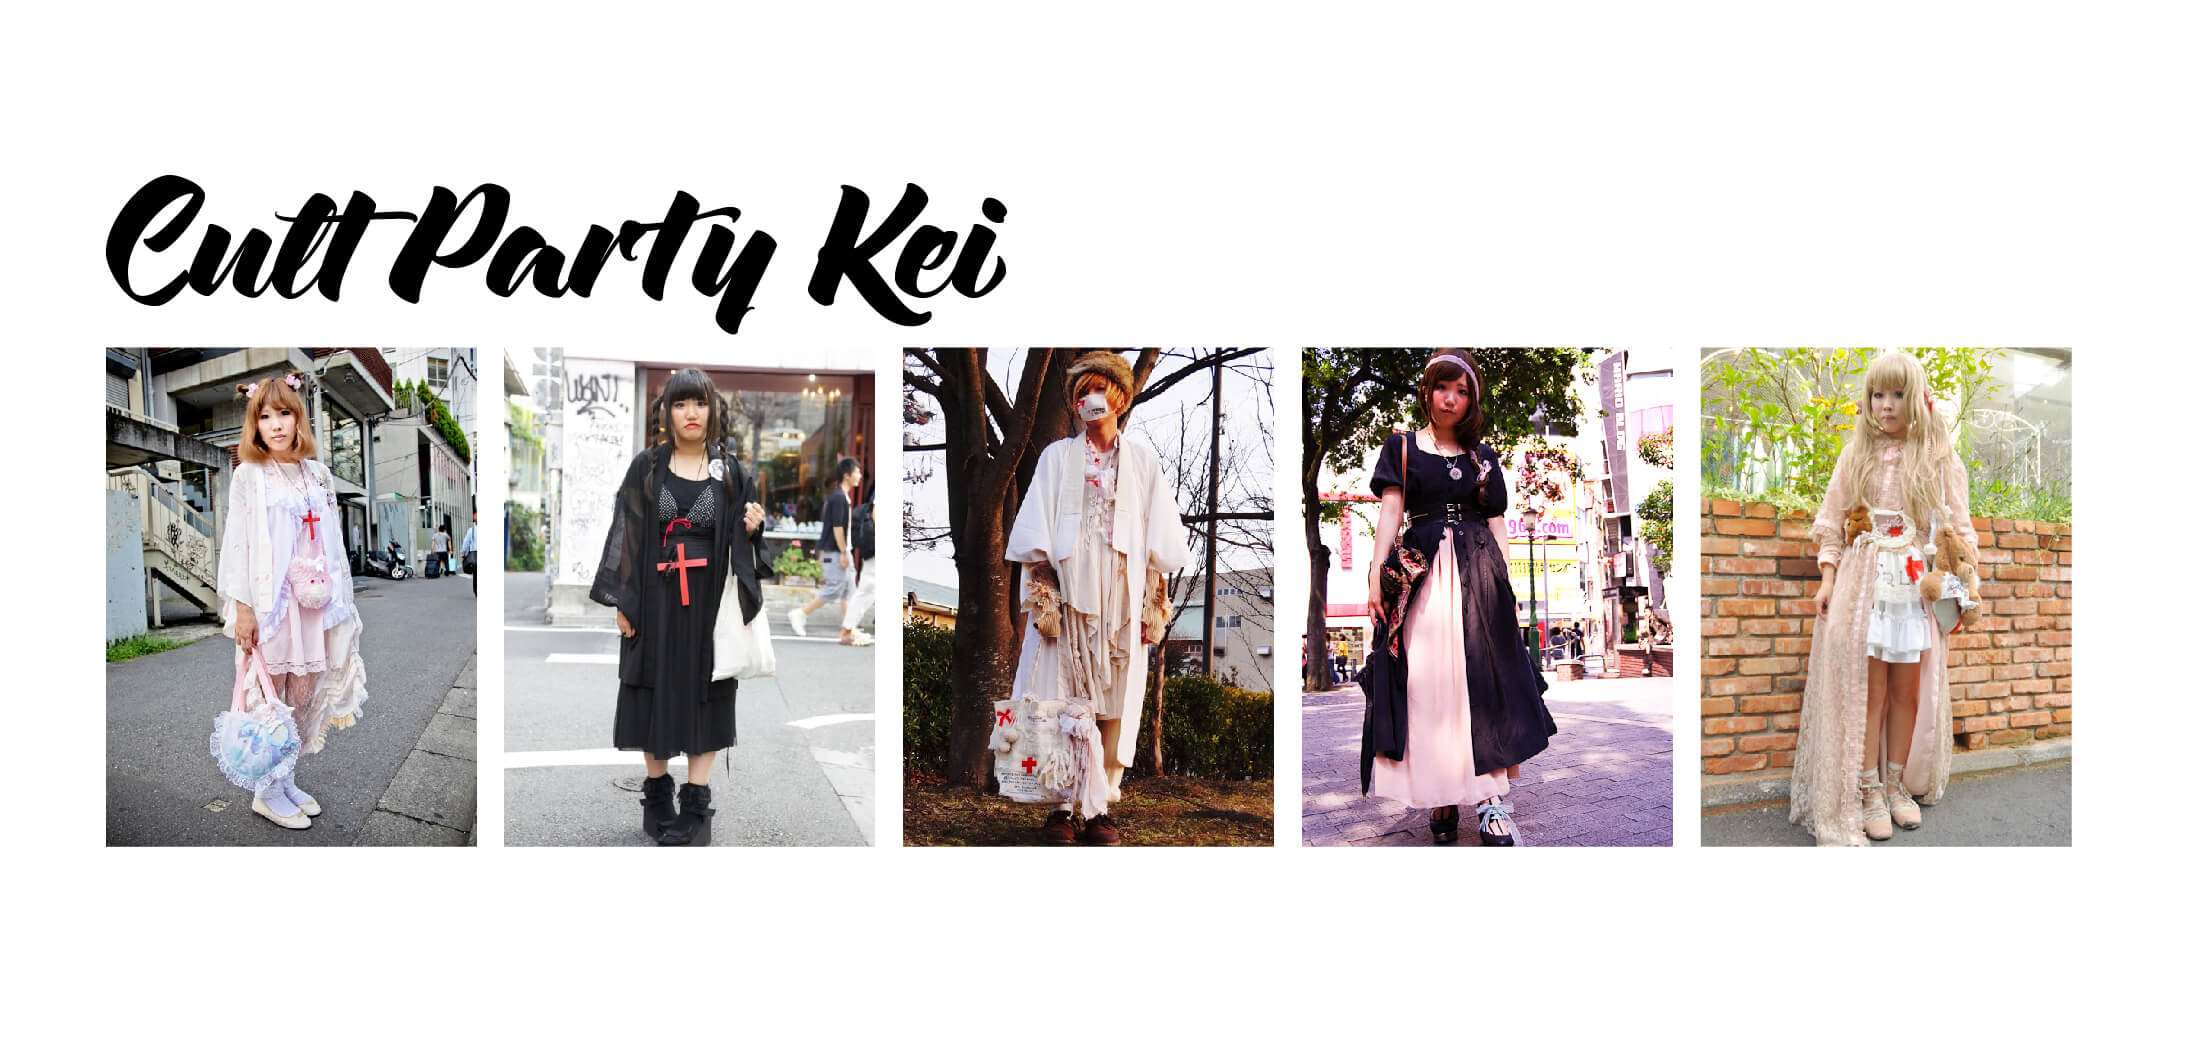 Examples of Cult Party Kei Fashion